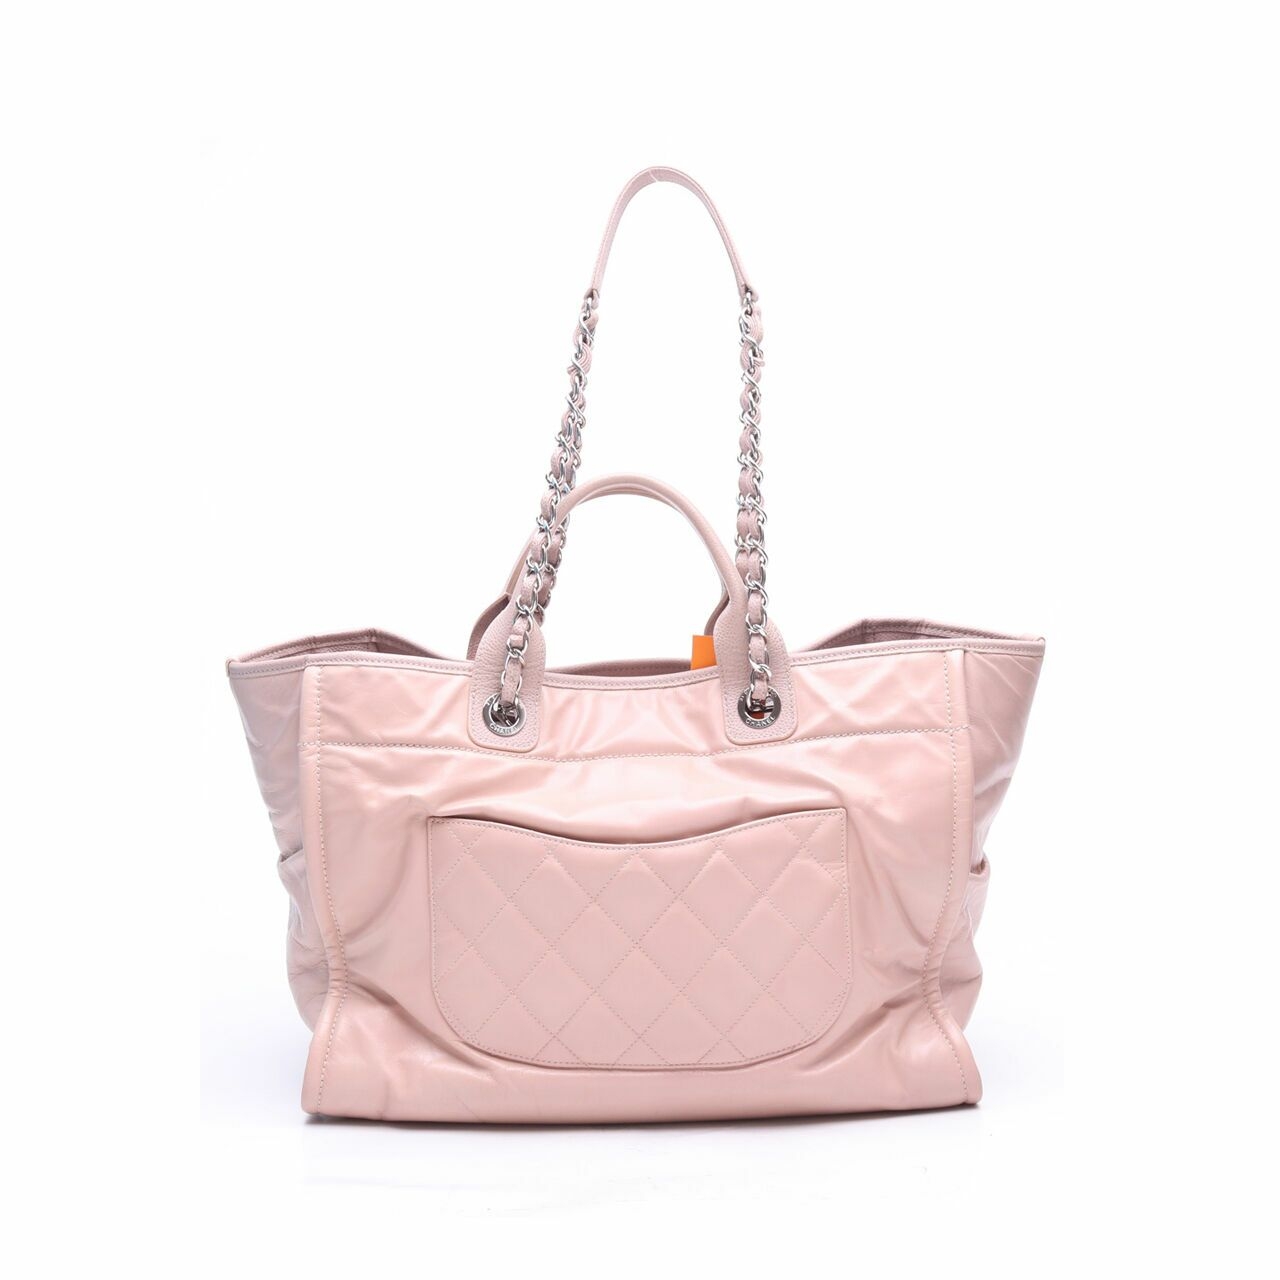 Chanel Deauville Pink Large Tote Bag 